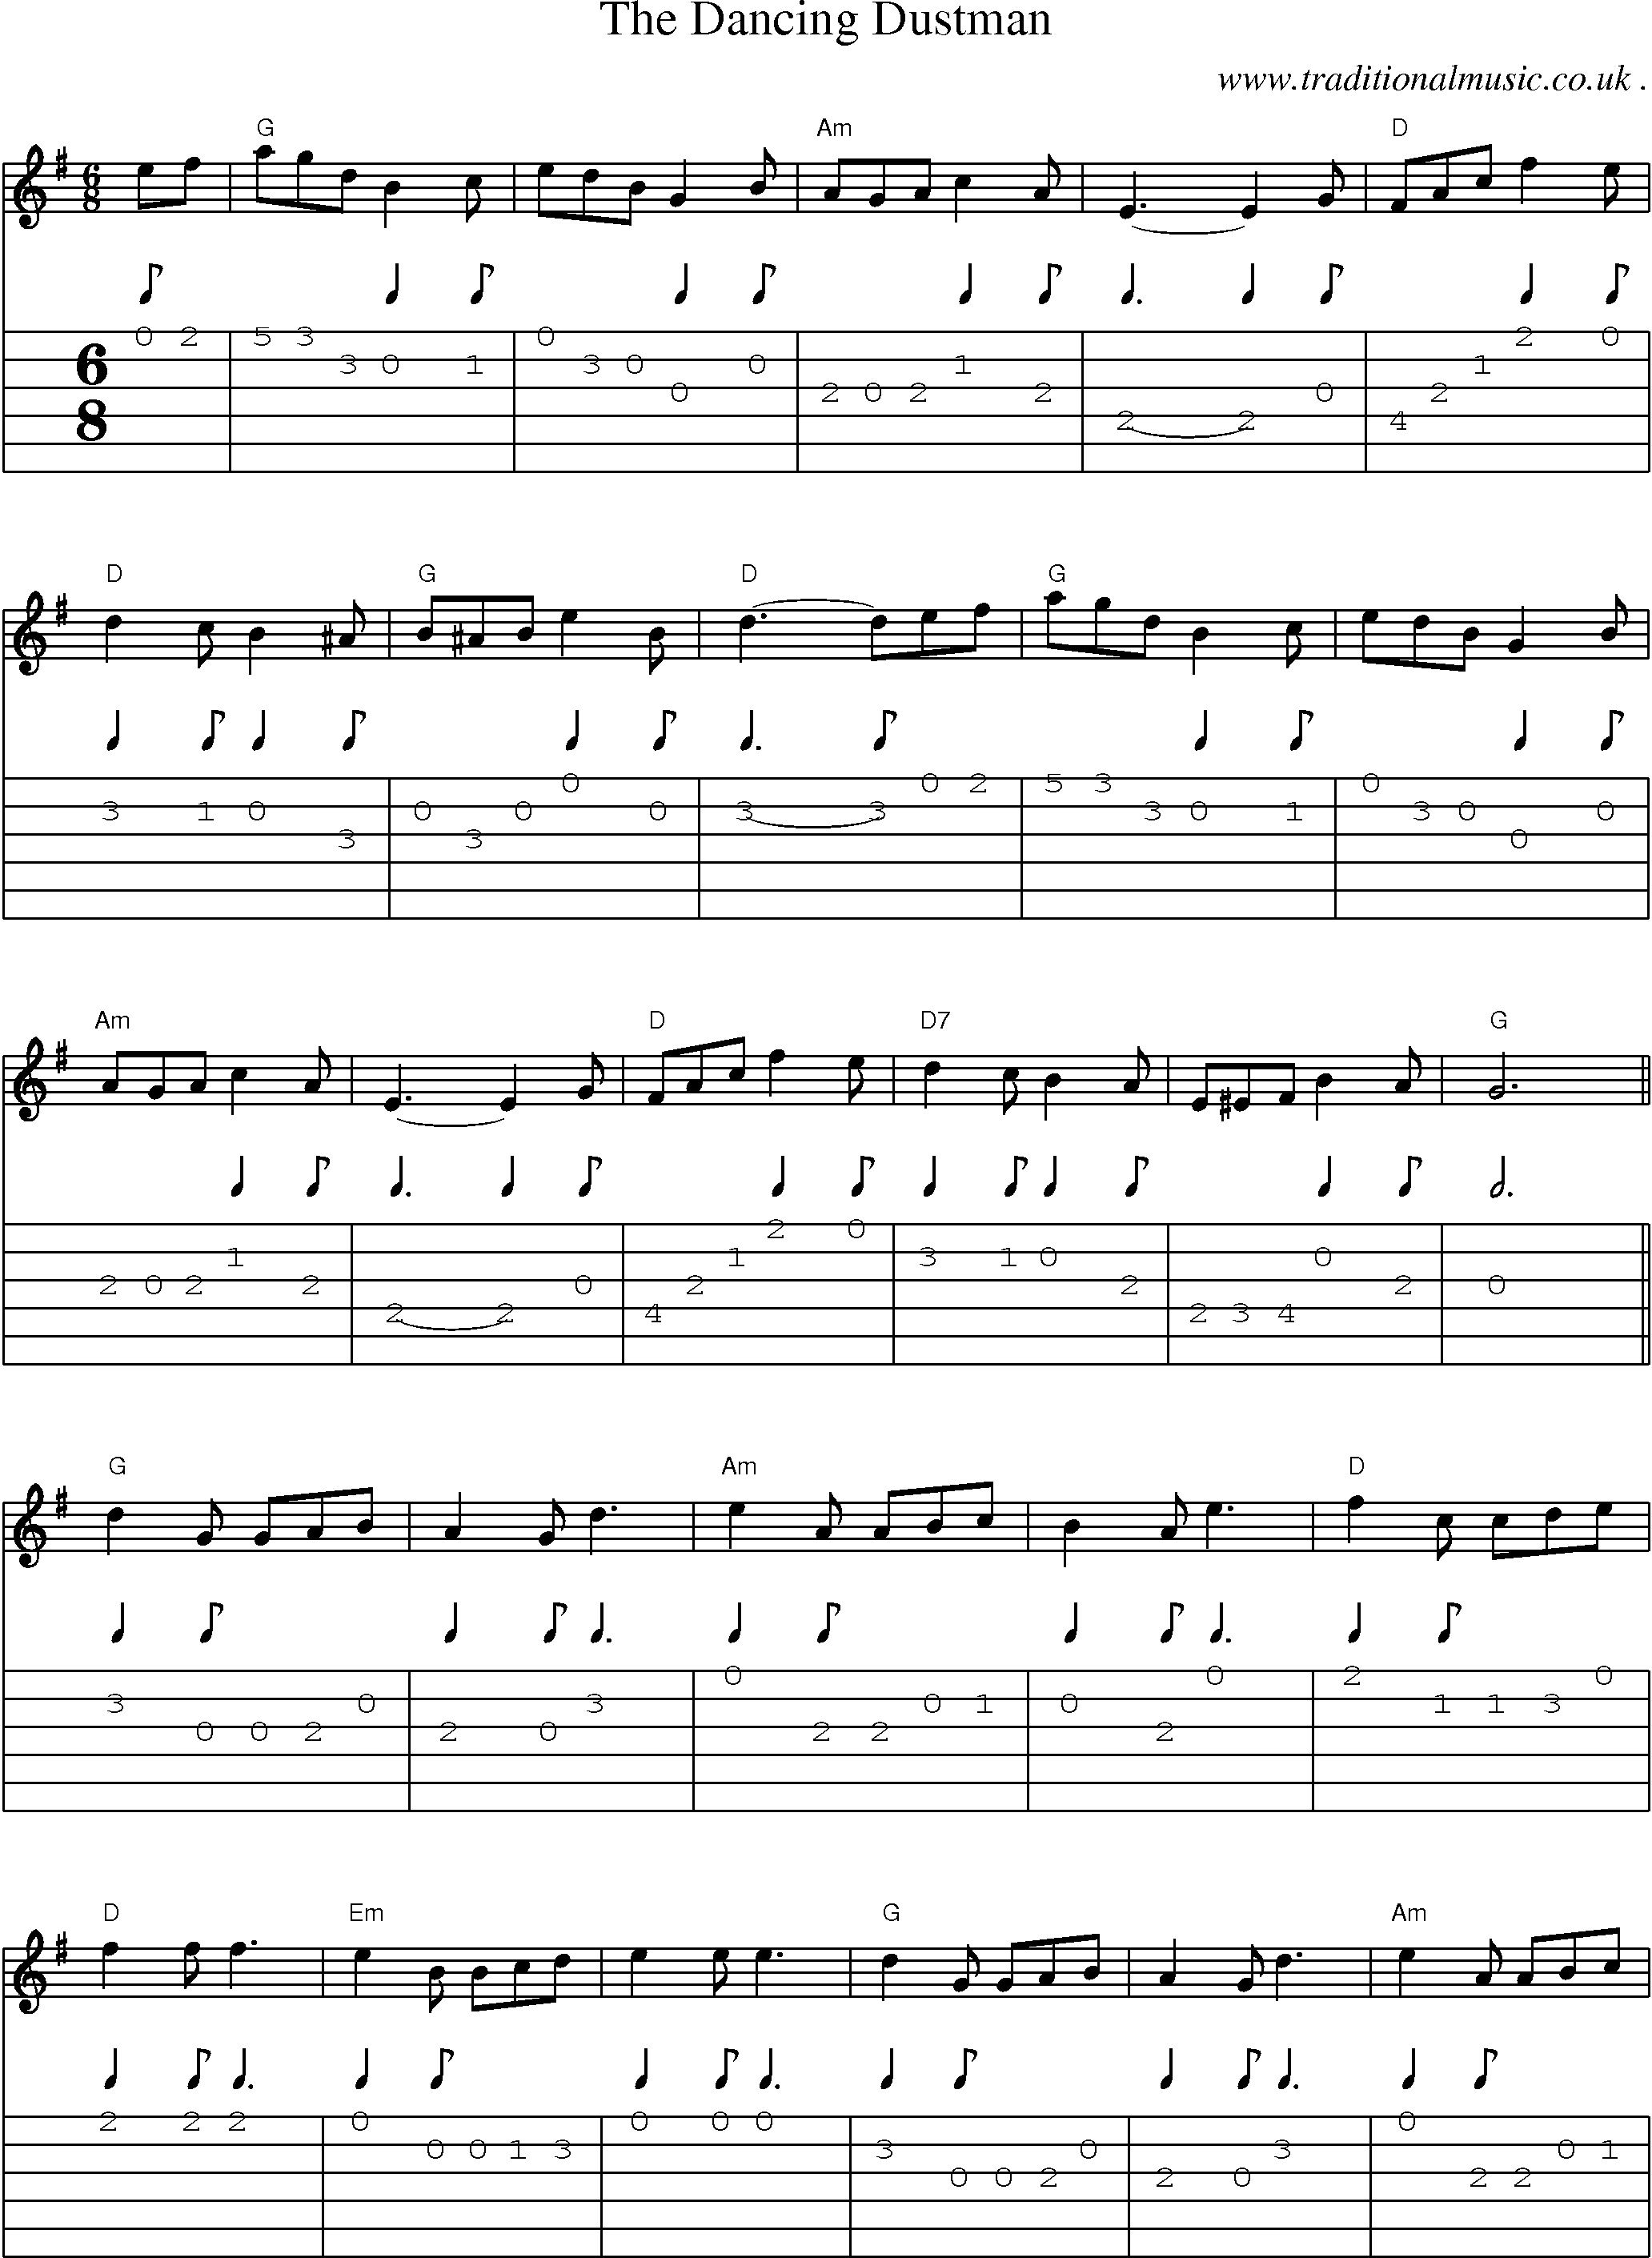 Sheet-Music and Guitar Tabs for The Dancing Dustman